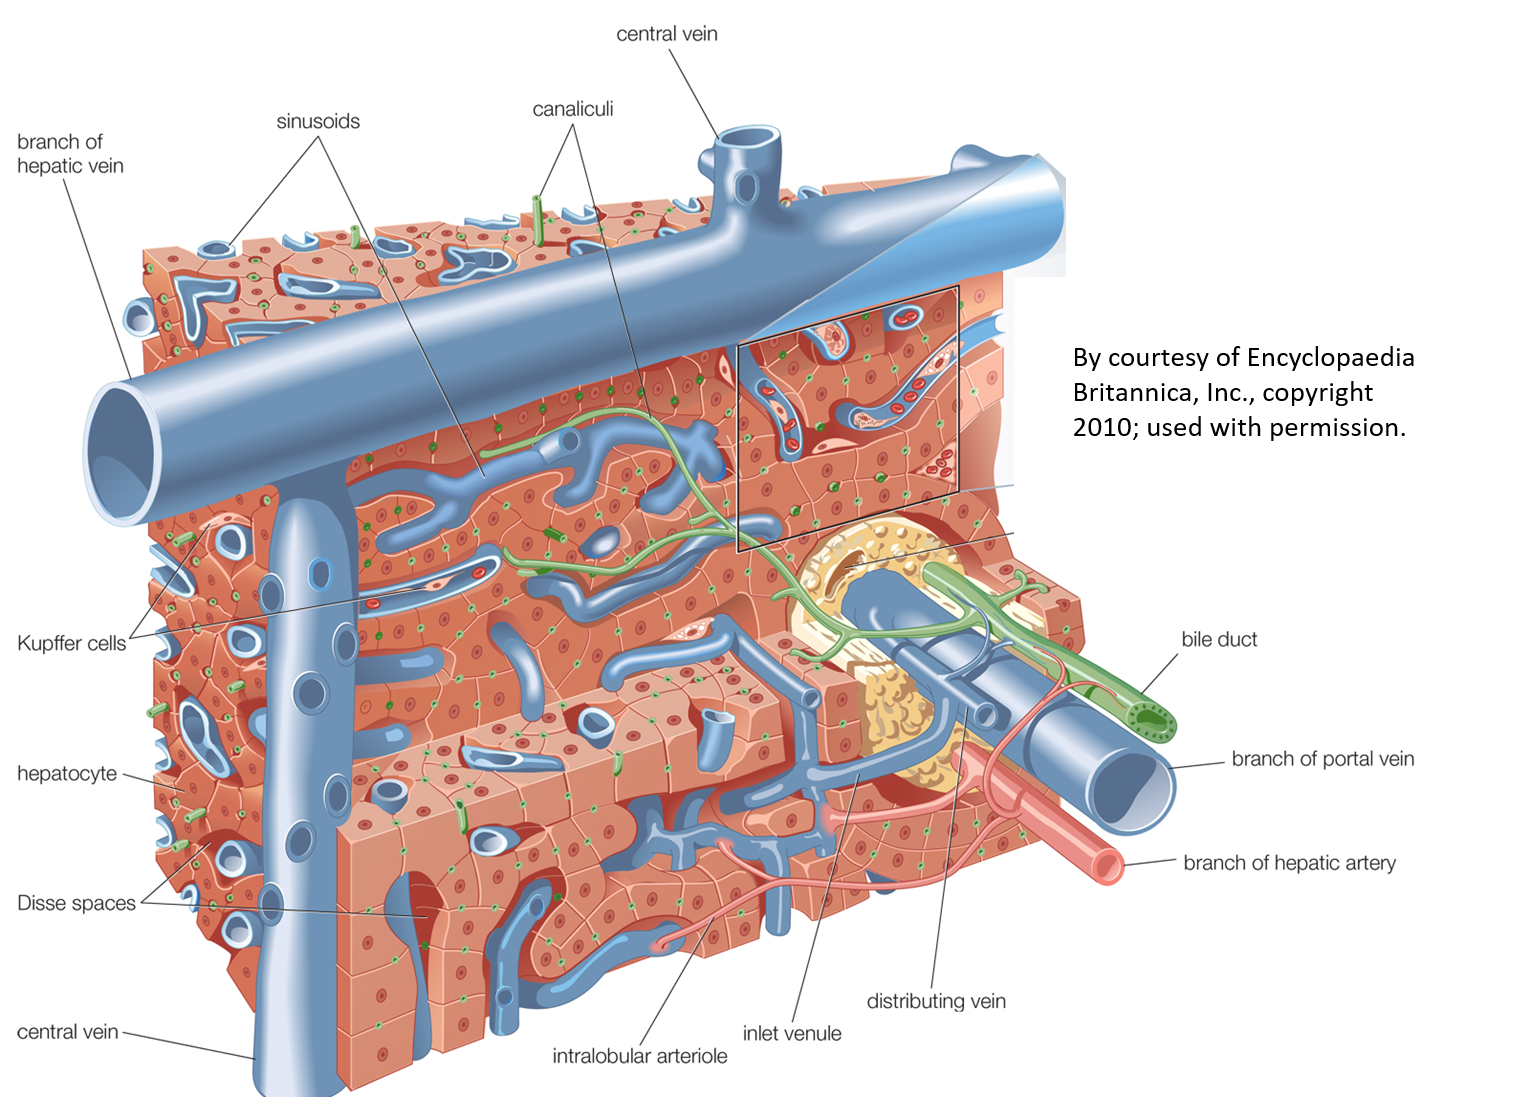 Illustration of complex architecture of liver.